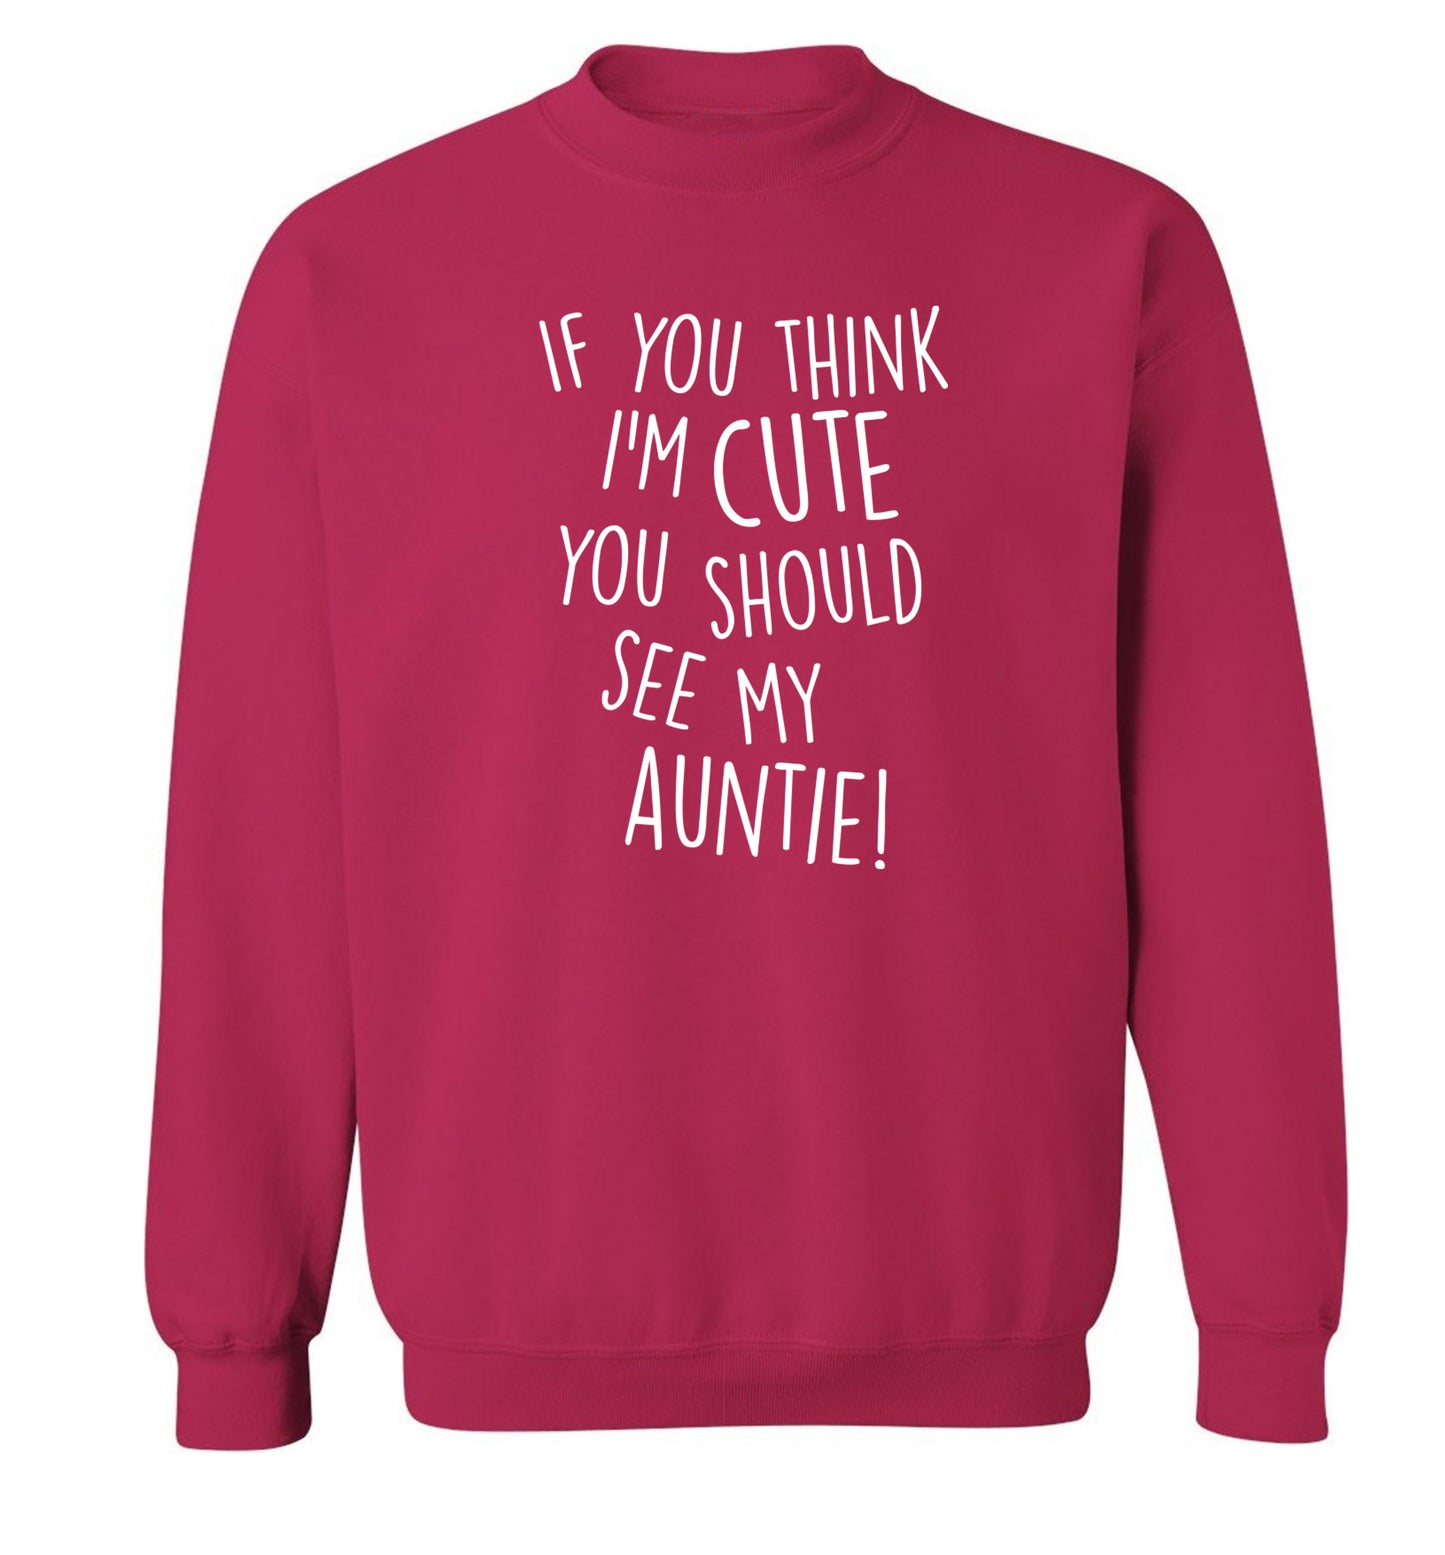 If you think I'm cute you should see my auntie Adult's unisex pink Sweater 2XL